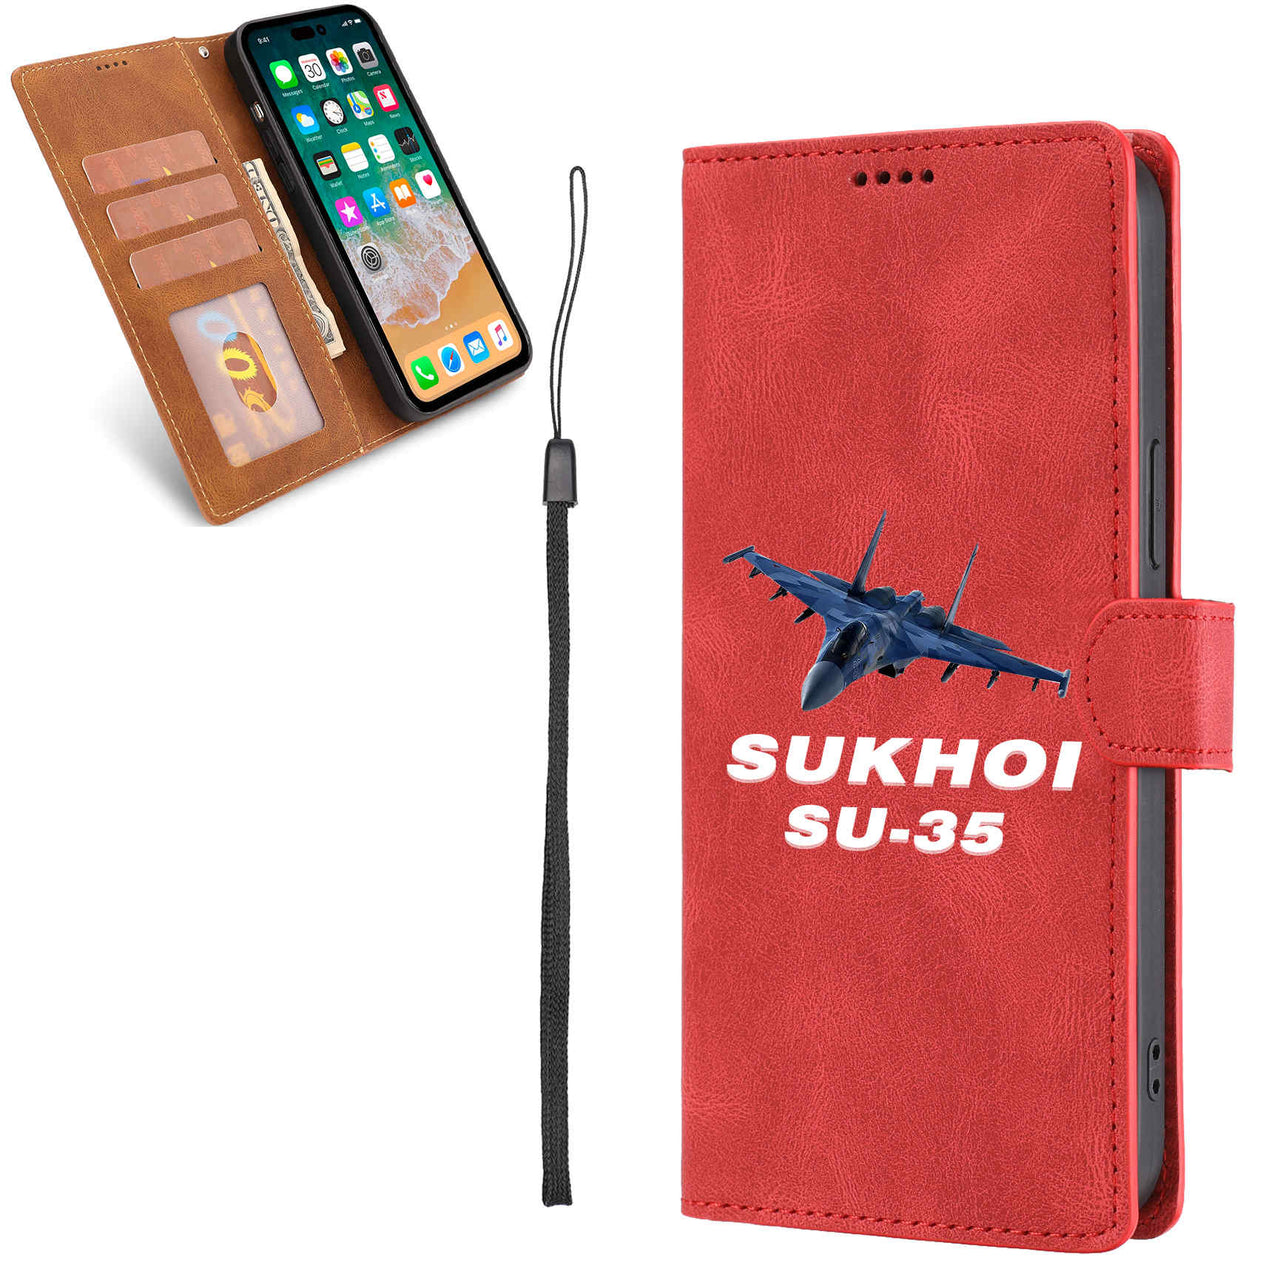 The Sukhoi SU-35 Designed Leather Samsung S & Note Cases